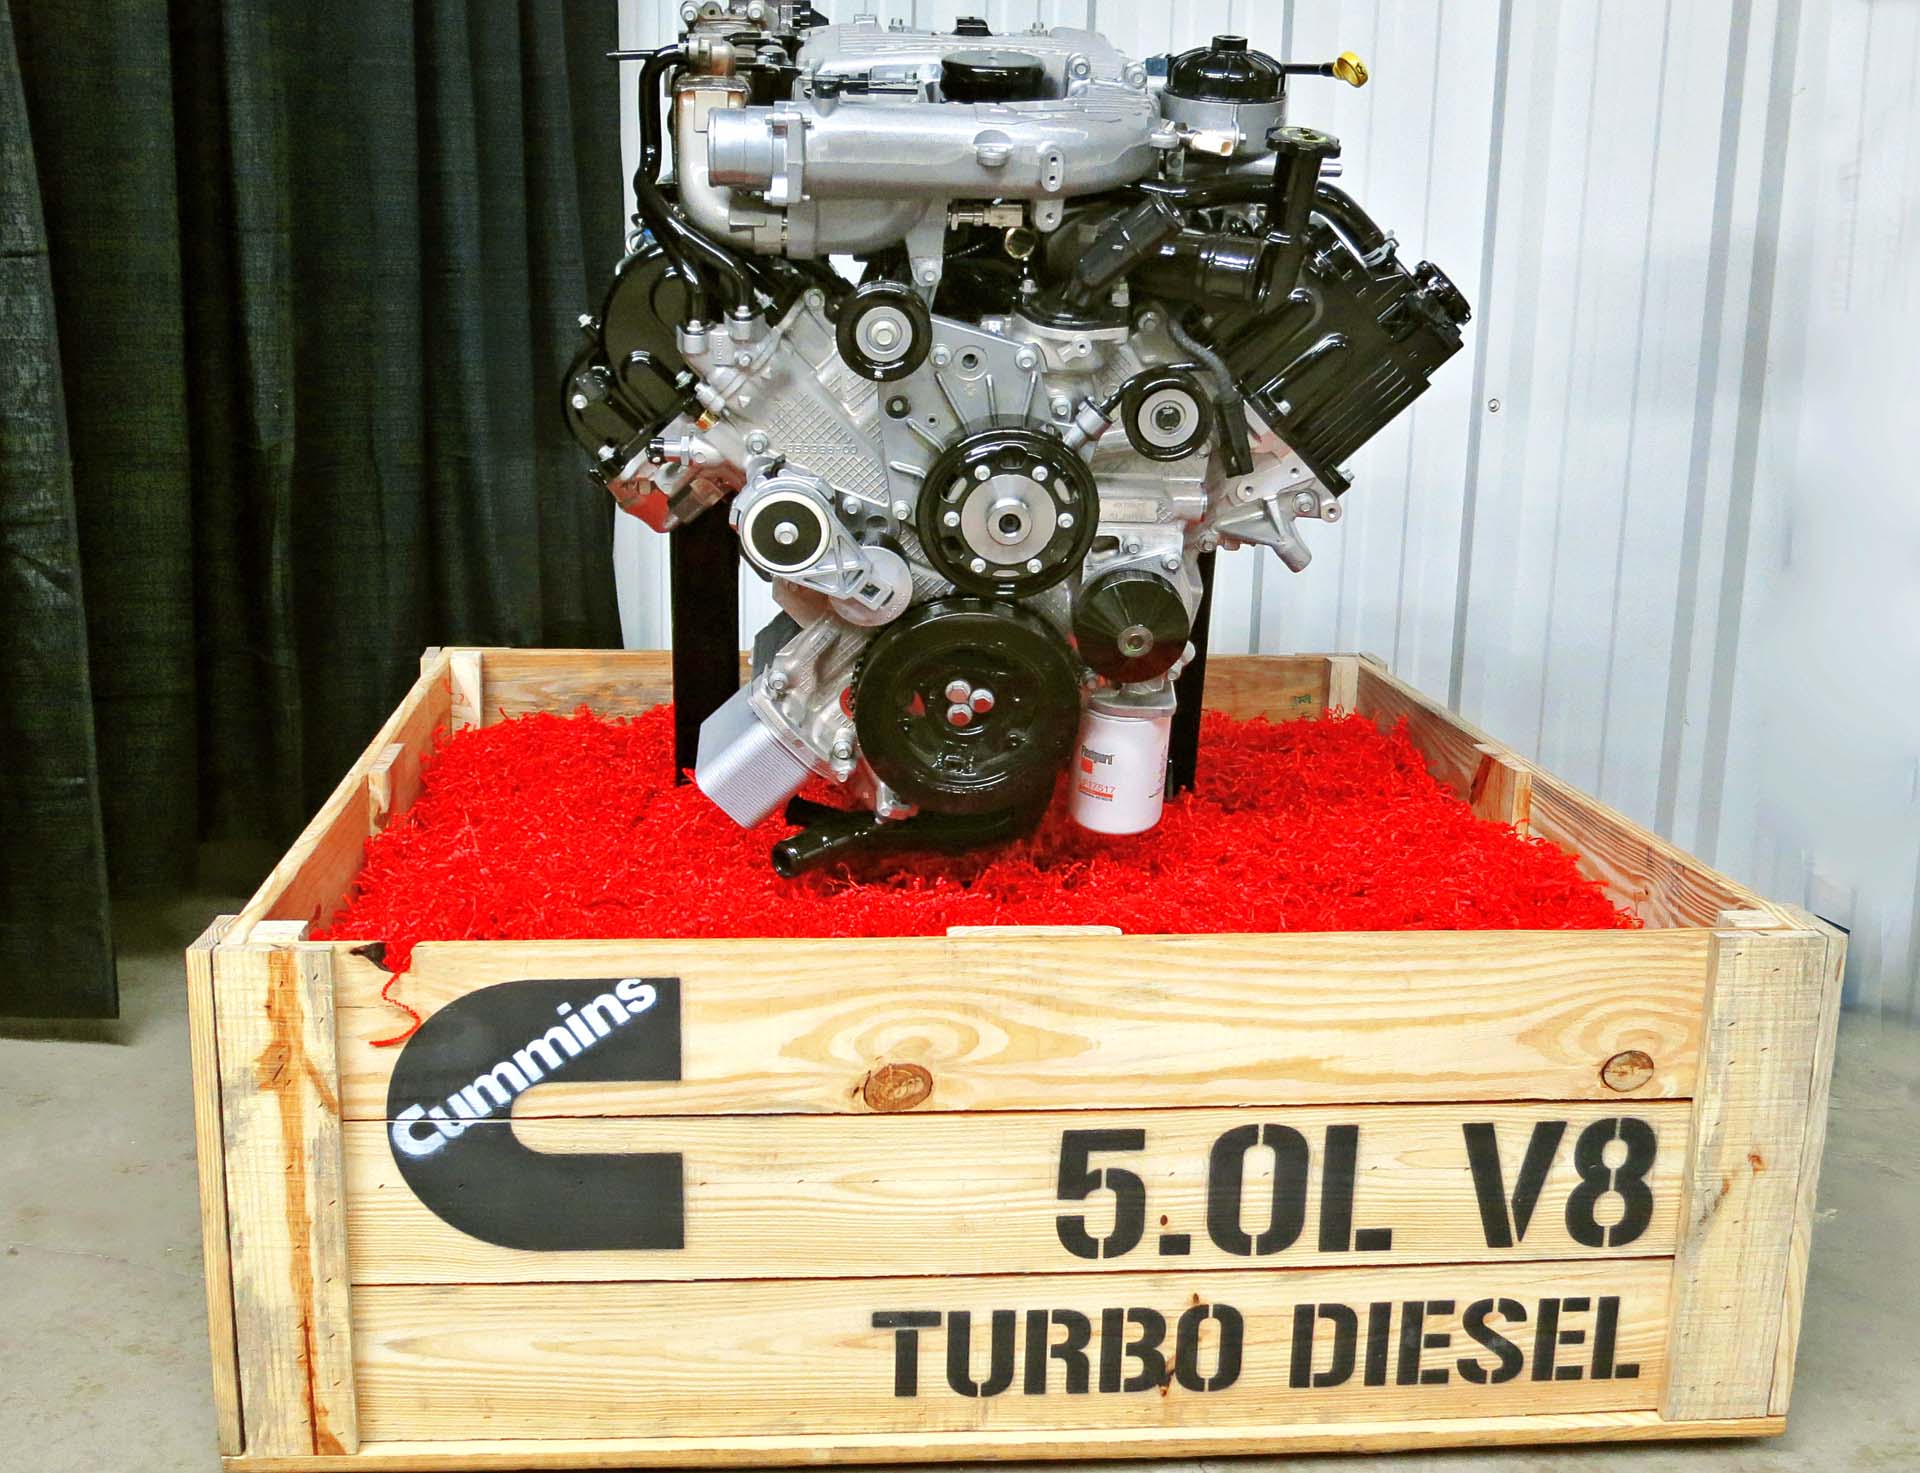 While it shares design similarities with the regular Titan, the XD has a unique front end, engineered to accommodate the larger diesel engine. The Titan XD's launch marks the debut of Cummins' new two-stage turbo system, designed to eliminate traditional turbo lag.<br><br> The 5.0-litre V8 diesel features a lightweight and compacted graphite iron block, aluminum heads and composite valve covers. It puts out 310 horsepower, but more importantly, 555 lb-ft of torque at 1,600 rpm. That’s 45 percent more torque than the gas-powered Titan.